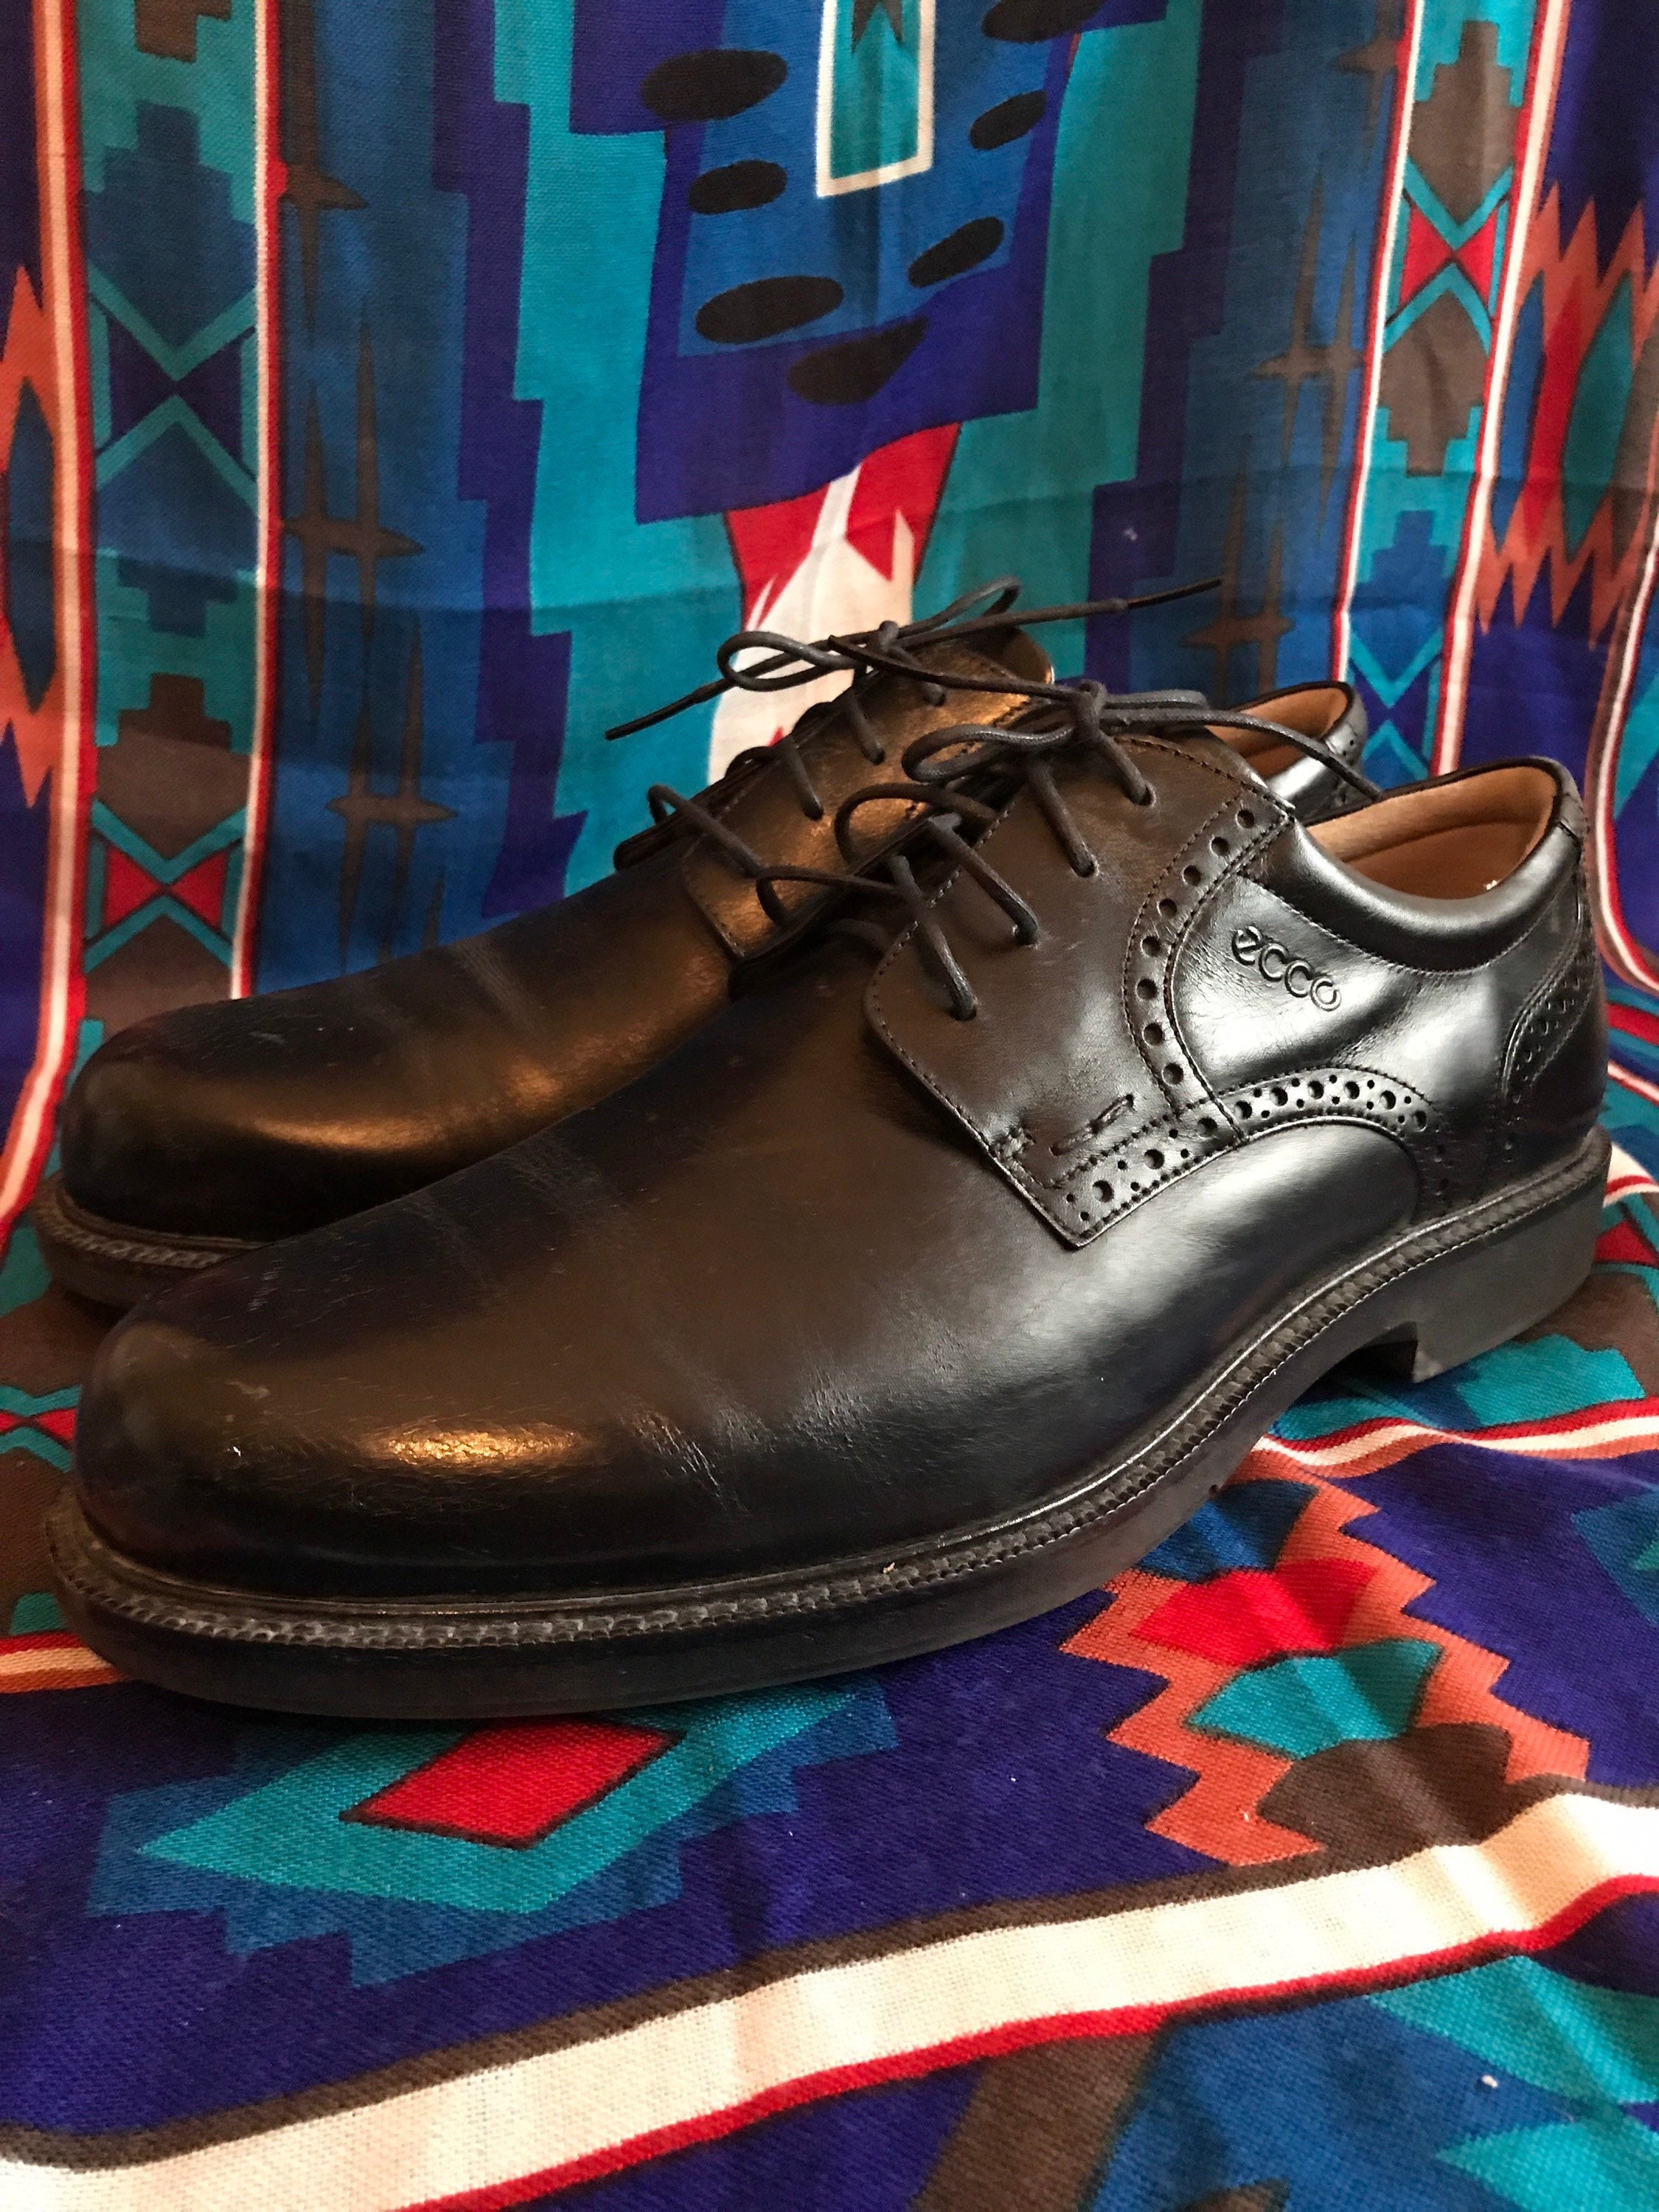 Vintage Shoe Ecco in Black Leather Lace-up Shoe - Etsy Finland